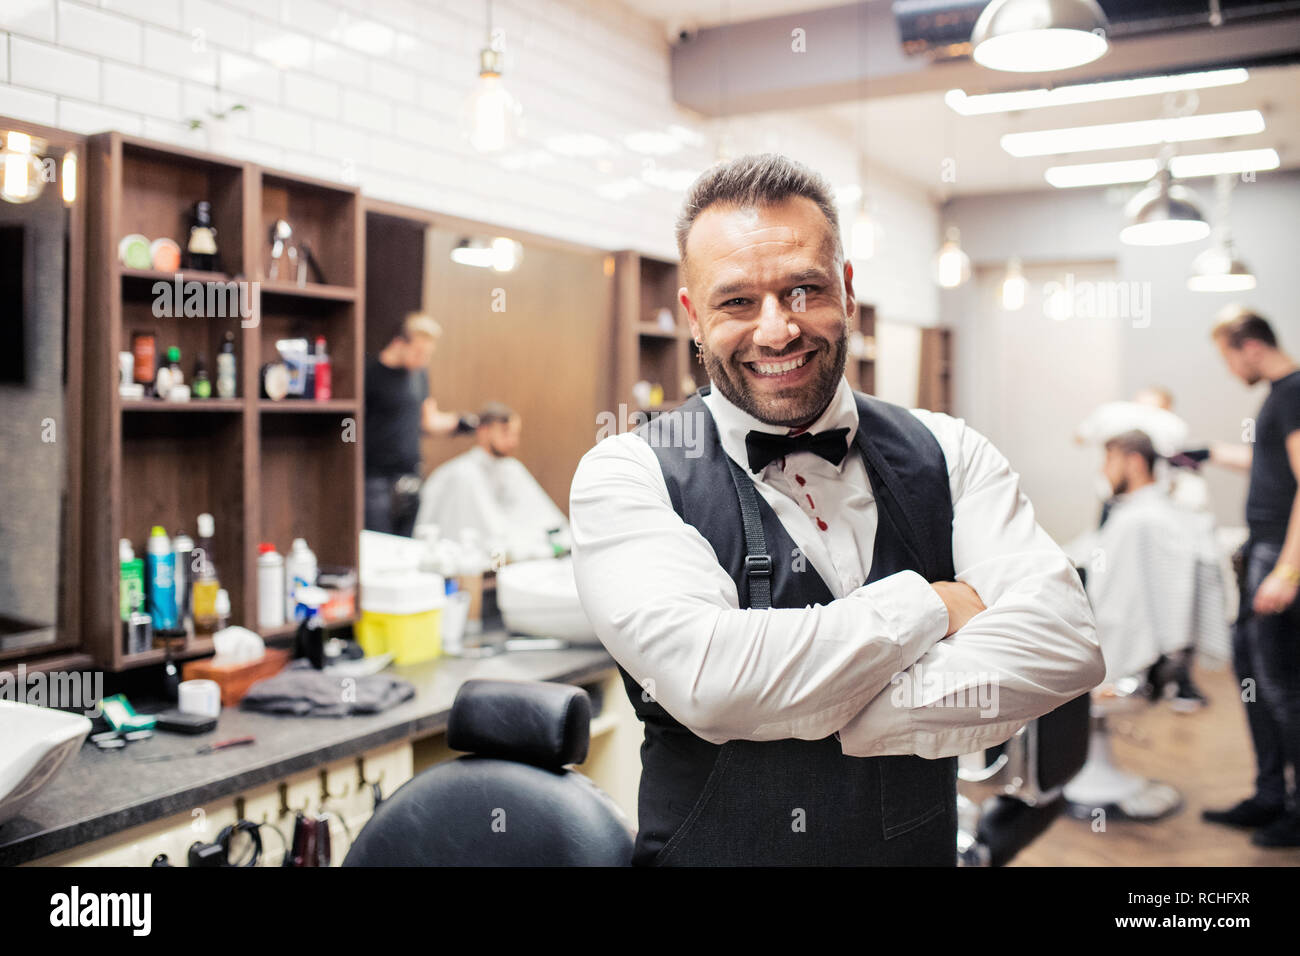 Young haidresser and hairstylist standing in barber shop. Stock Photo